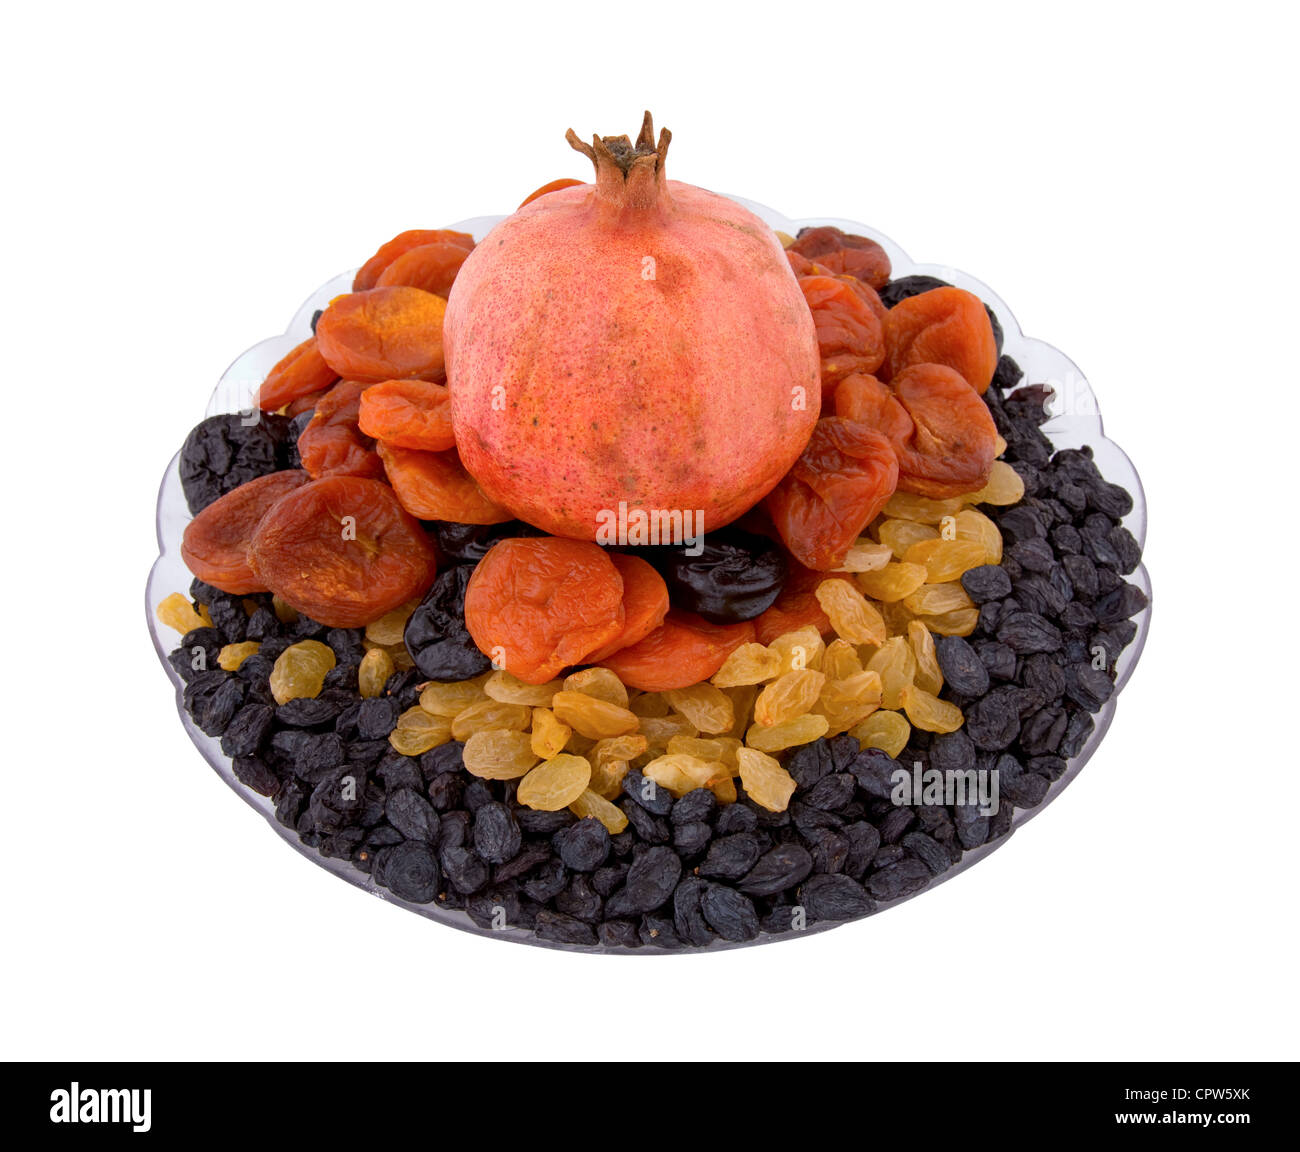 Pomegranate, raisins, dried apricots, prunes on a plate on a white background Stock Photo